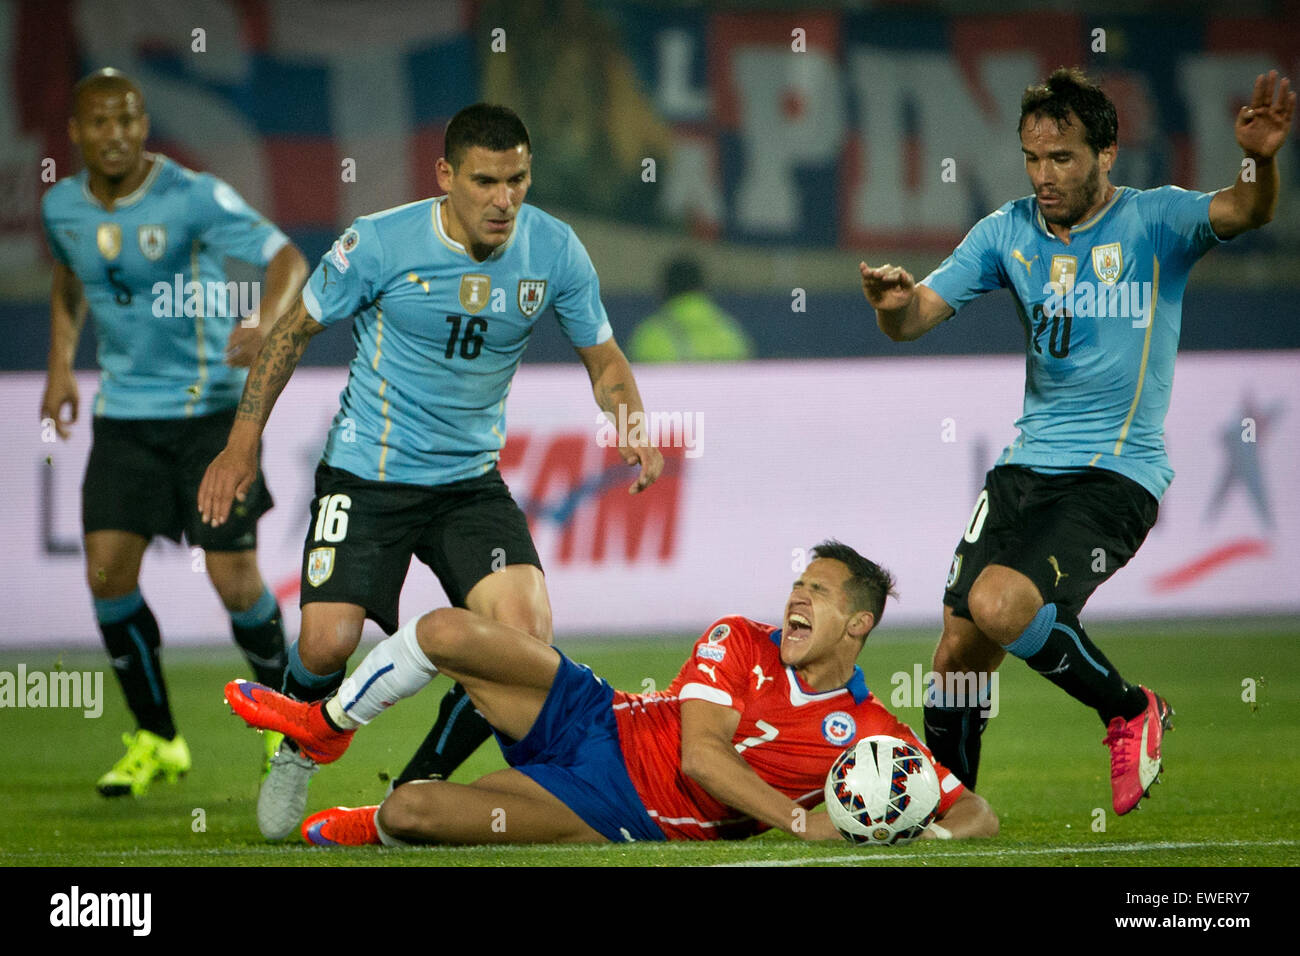 Santiago, Chile. 24th June, 2015. Alexis Sanchez (Bottom) of Chile vies with Maxi Pereira (L) of Uruguay during their quarterfinal against Uruguay at 2015 Copa America in Santiago, Chile, on June 24, 2015. Chile won 1-0. Credit:  Pedro Mera/Xinhua/Alamy Live News Stock Photo